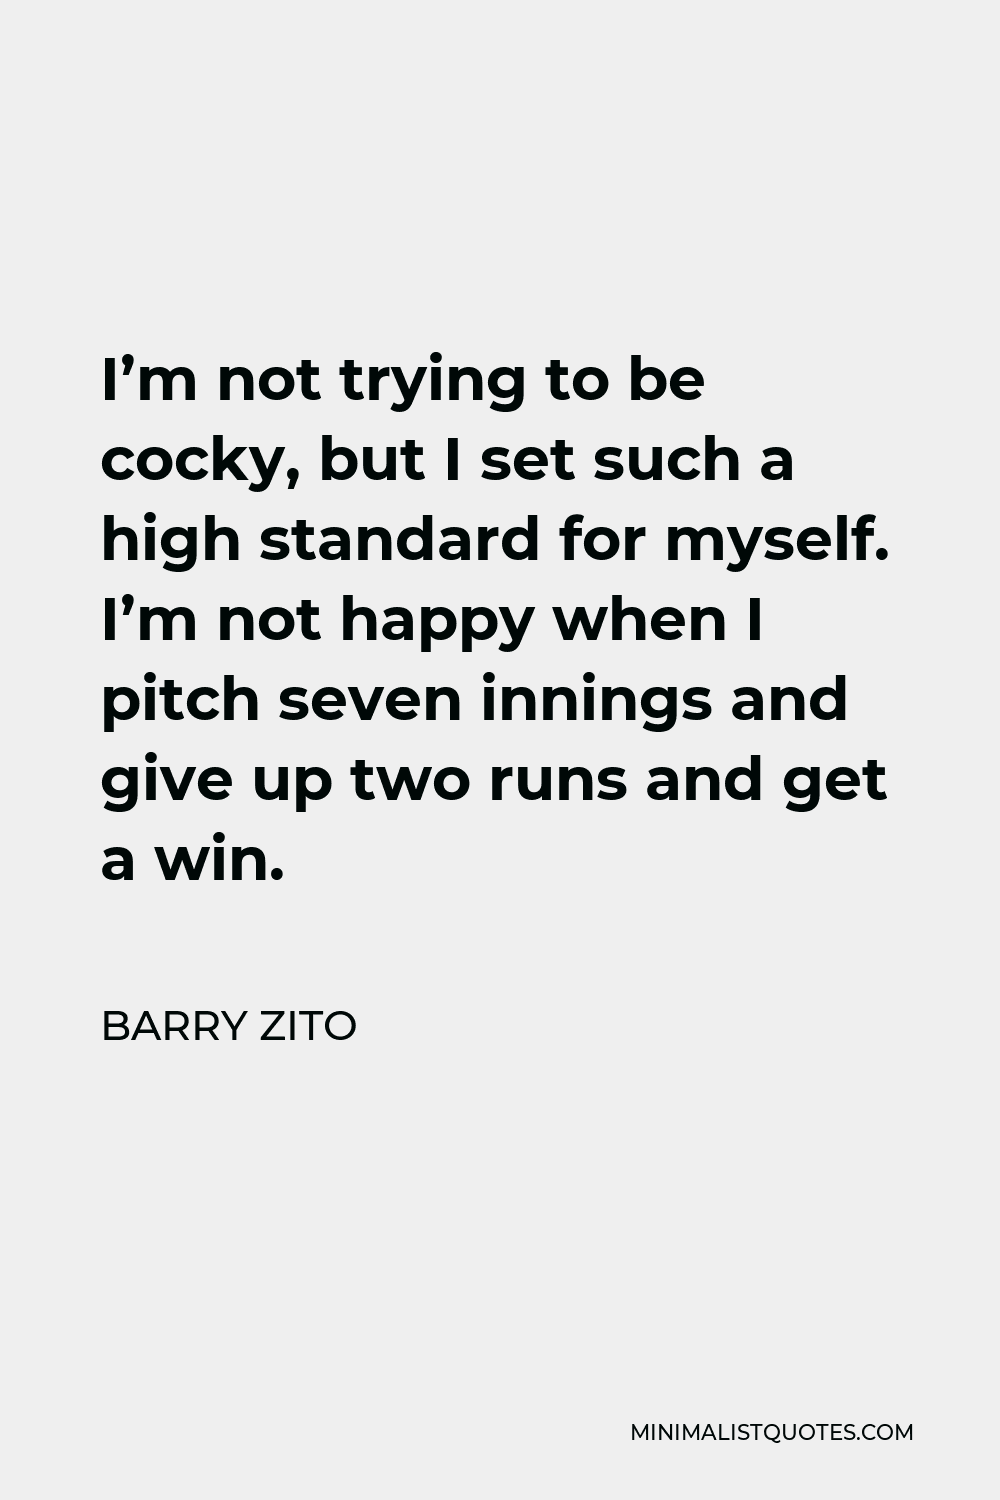 Barry Zito Quote - I’m not trying to be cocky, but I set such a high standard for myself. I’m not happy when I pitch seven innings and give up two runs and get a win.